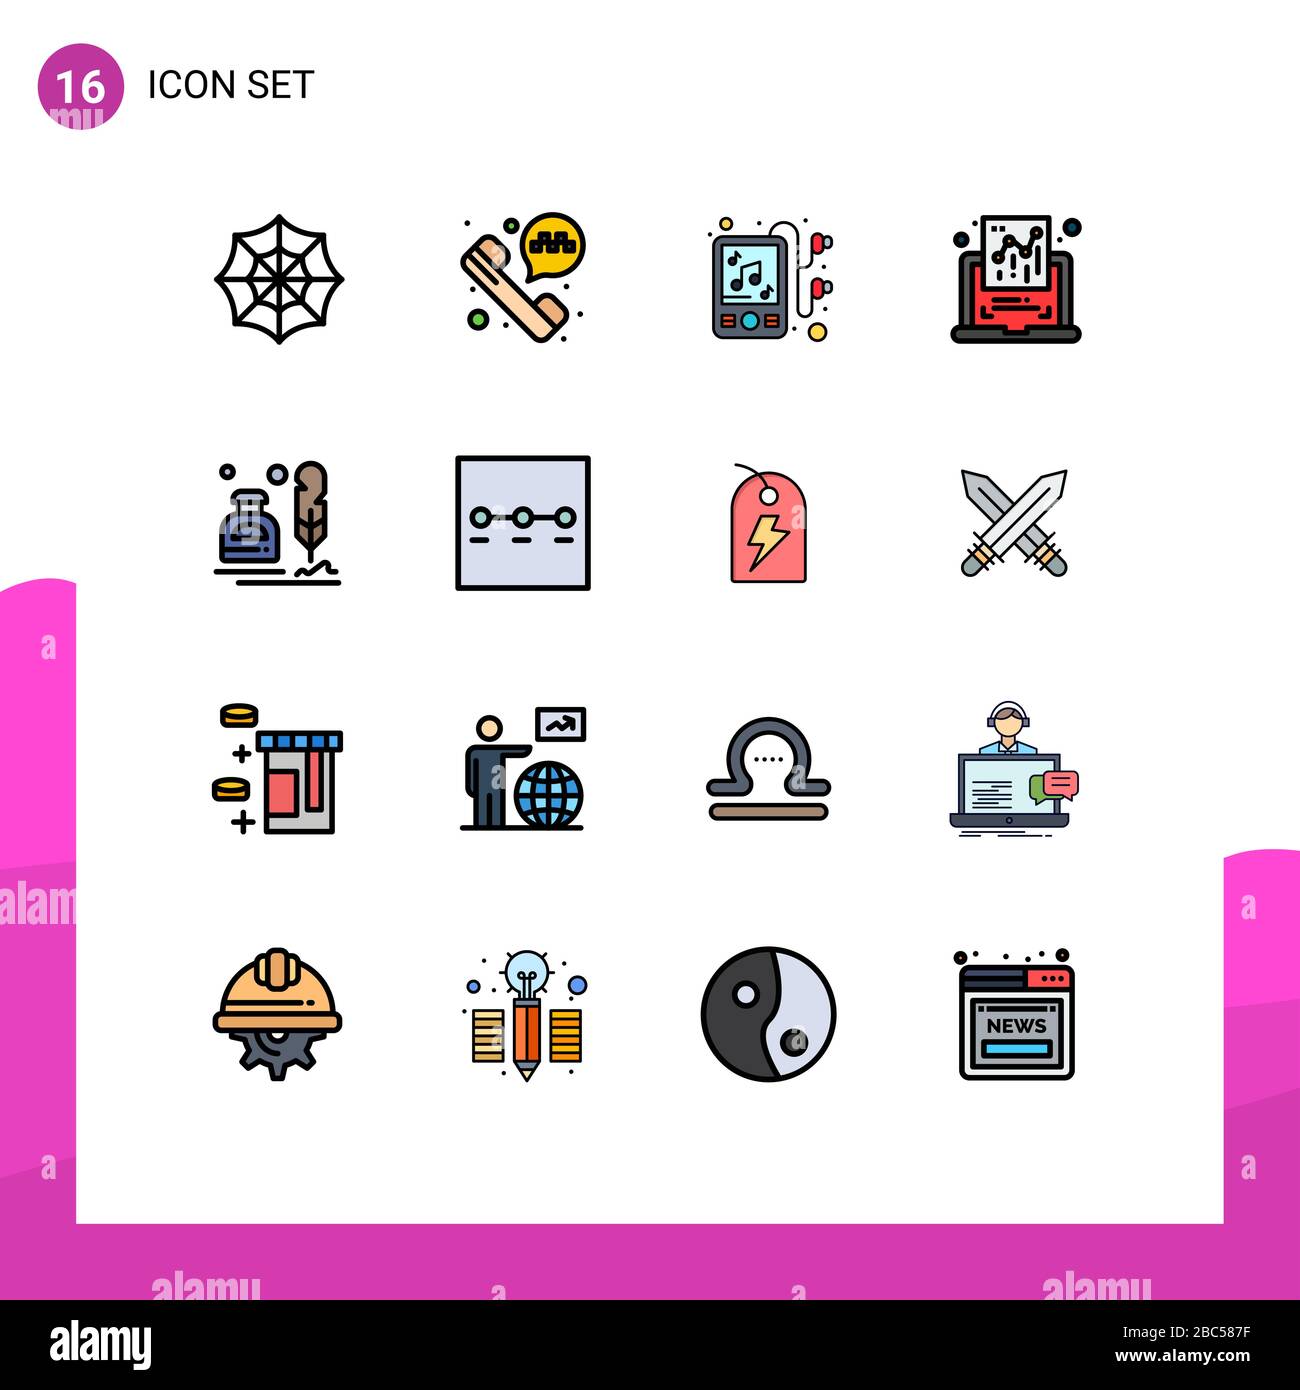 16 User Interface Flat Color Filled Line Pack of modern Signs and Symbols of office, fur, music, erite, report Editable Creative Vector Design Element Stock Vector